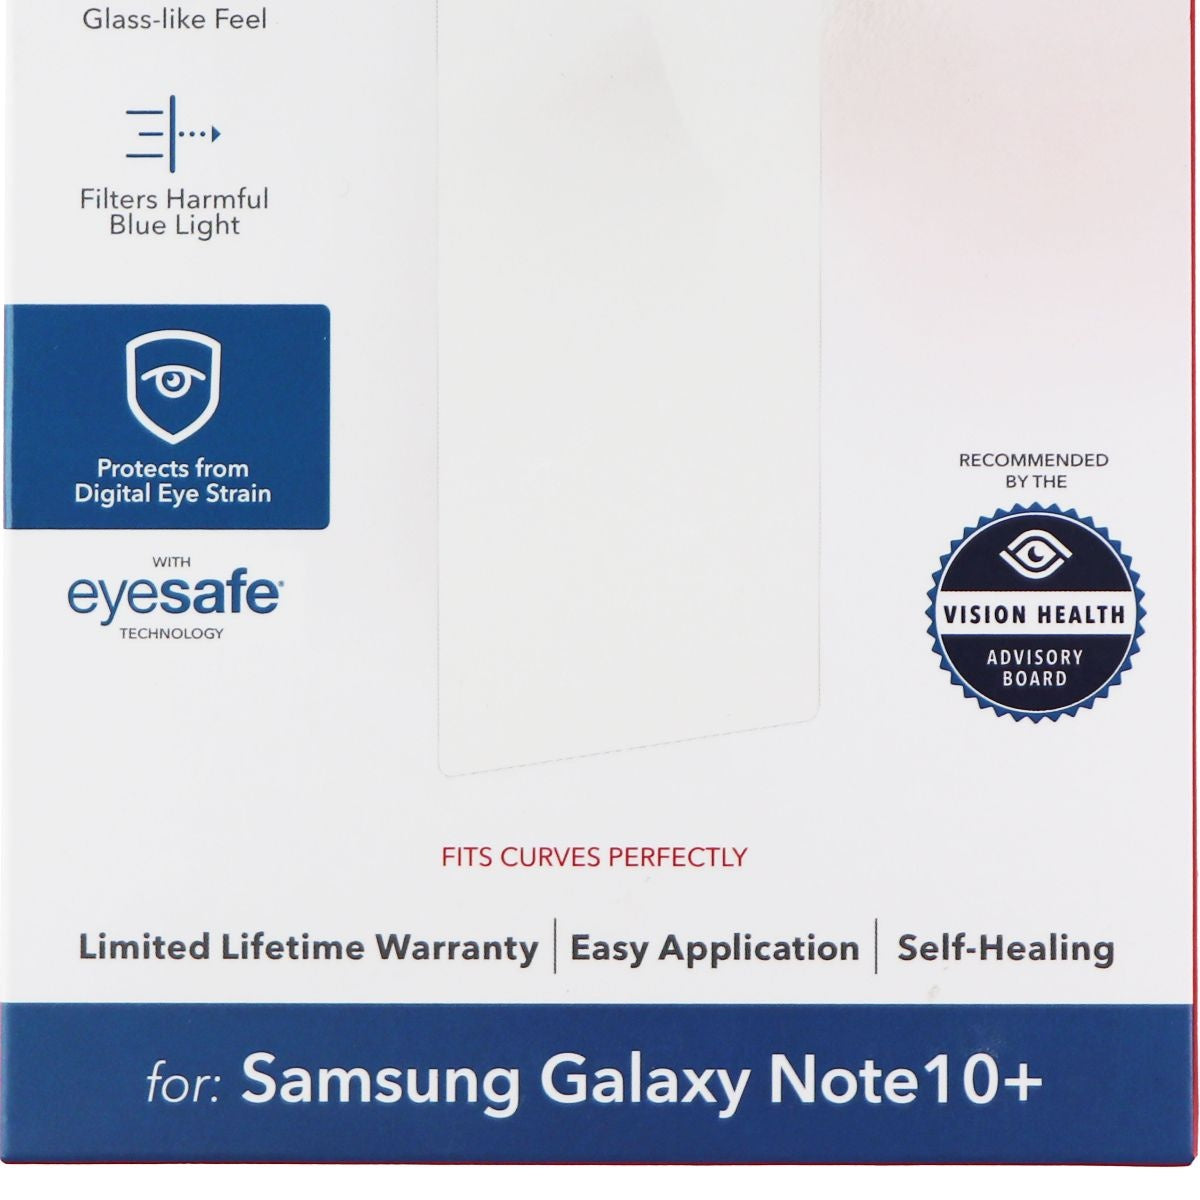 ZAGG Ultra Vision Guard Film Screen Protector for Samsung Note10+ (Plus Model) Cell Phone - Screen Protectors Zagg    - Simple Cell Bulk Wholesale Pricing - USA Seller